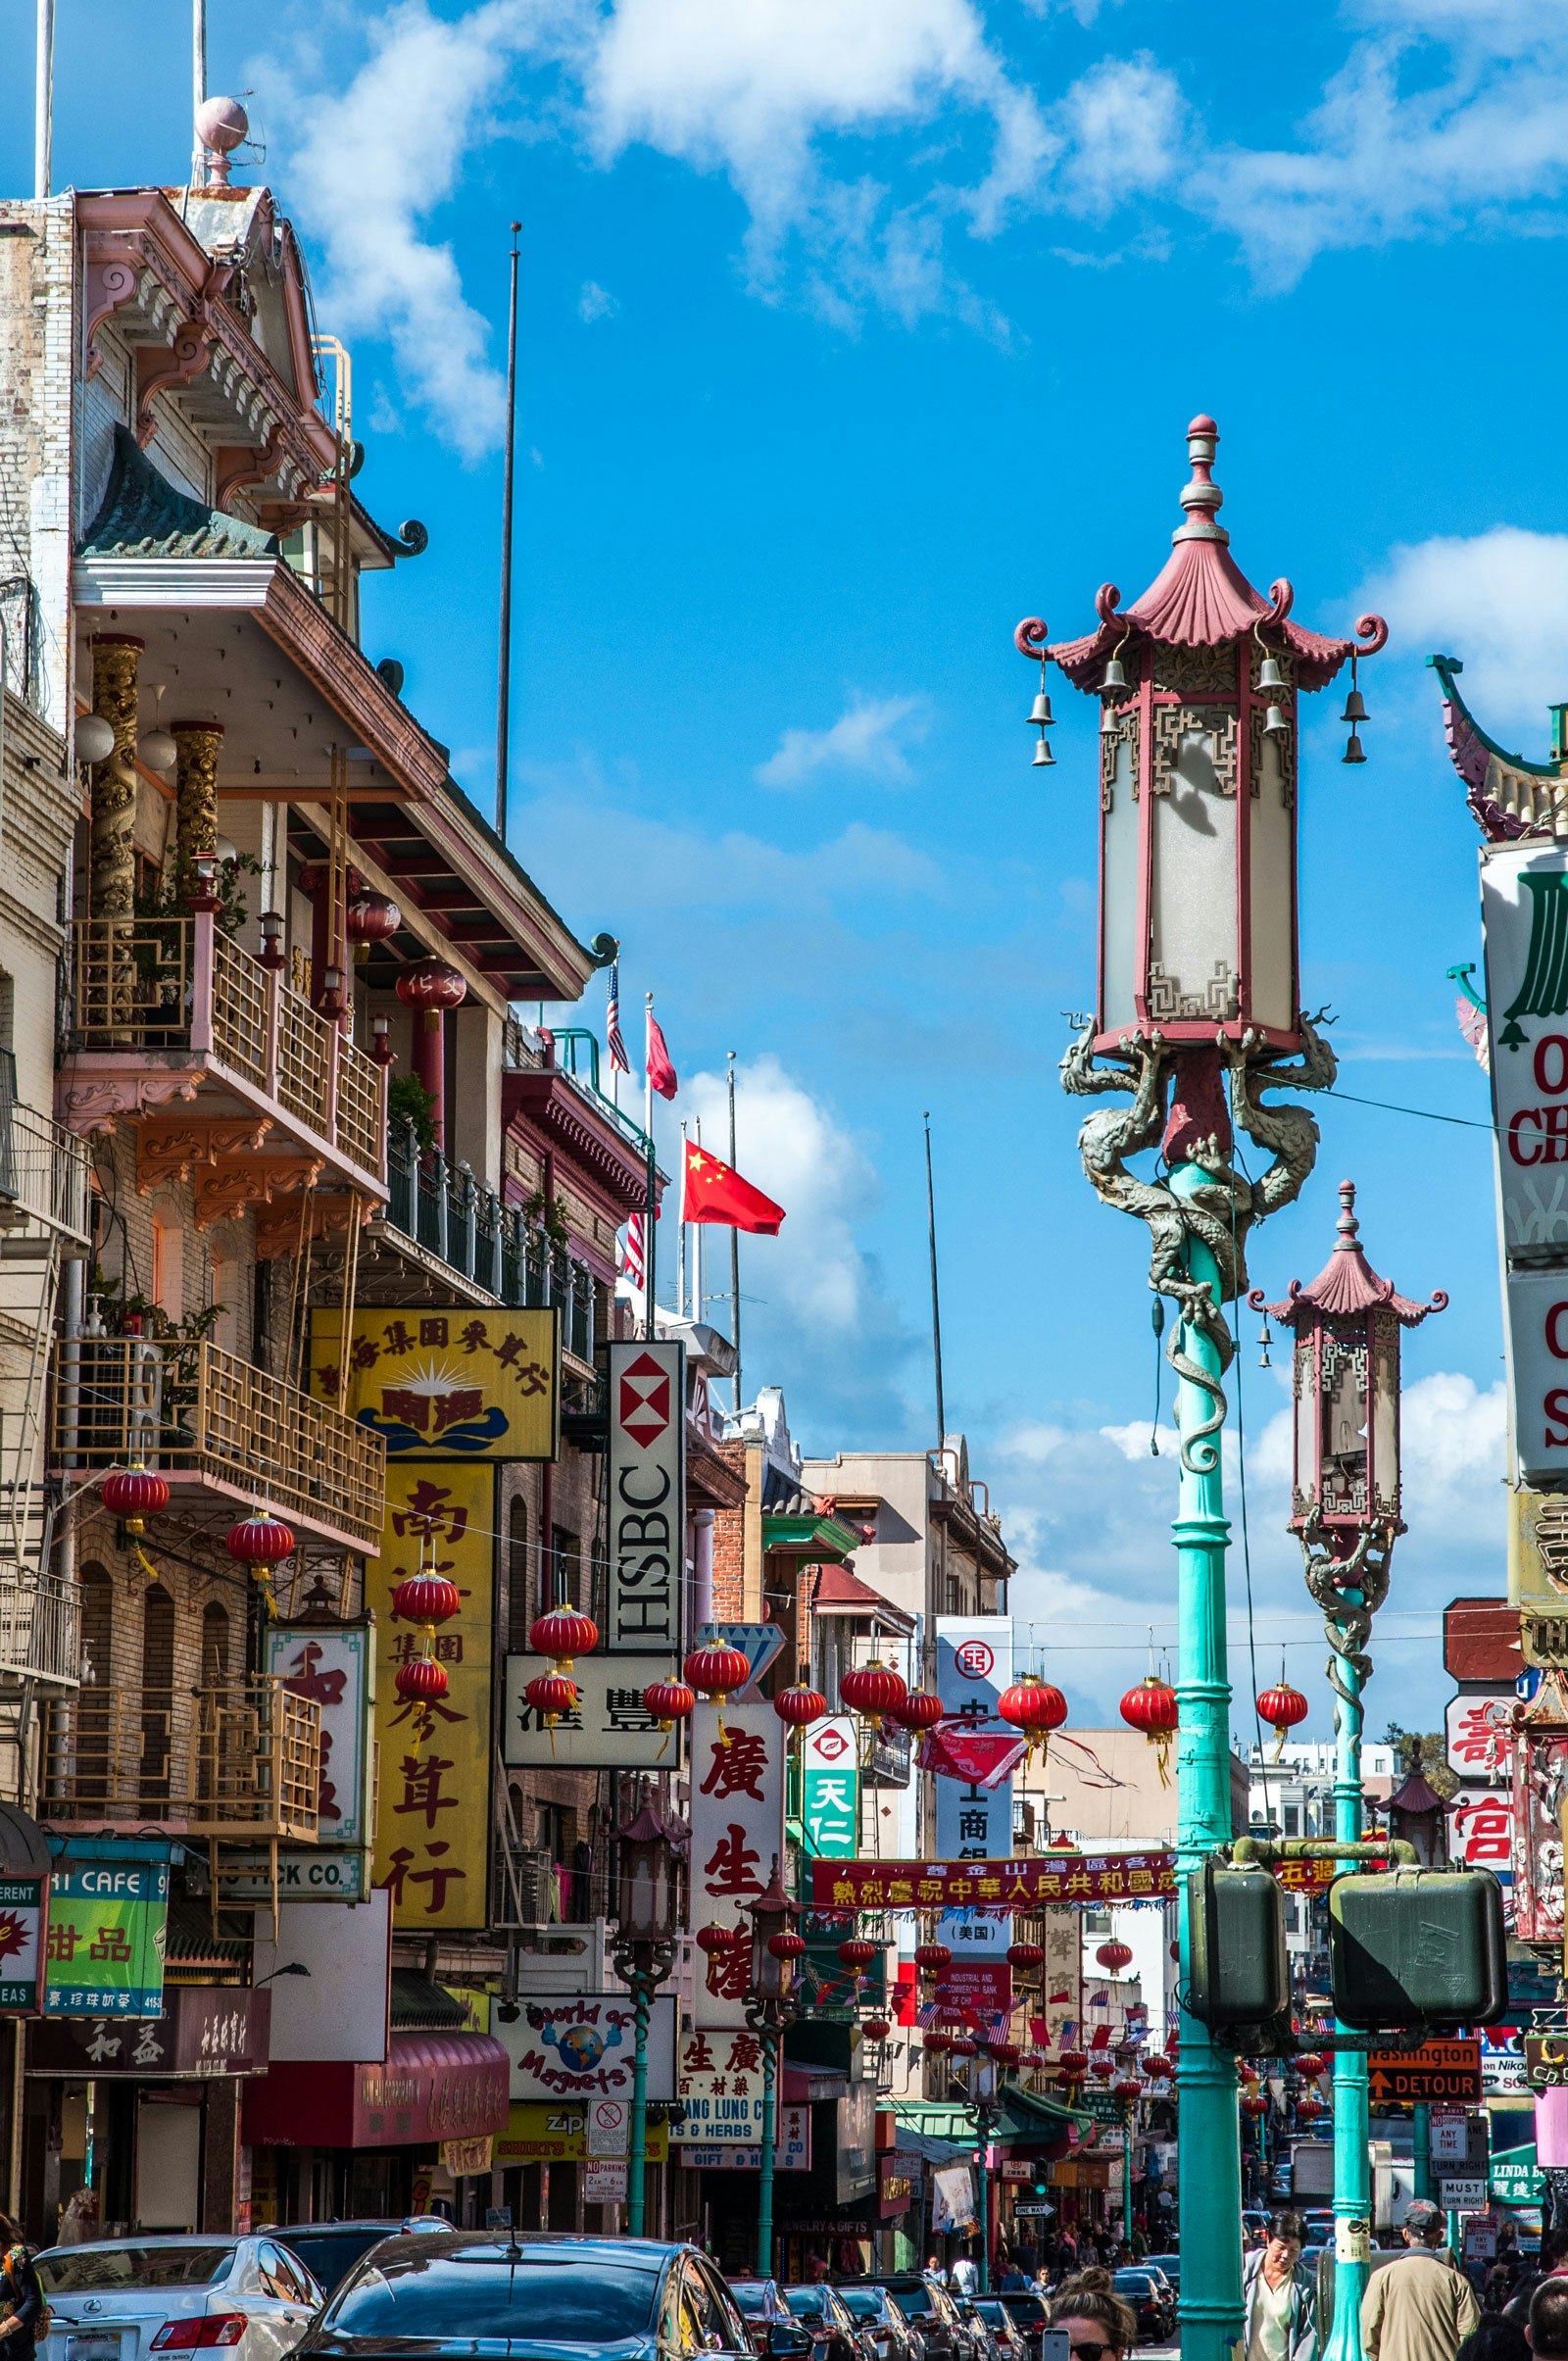 A busy street in San Francisco's Chinatown, red lanterns hang over the street while dragons adorn a streetlight